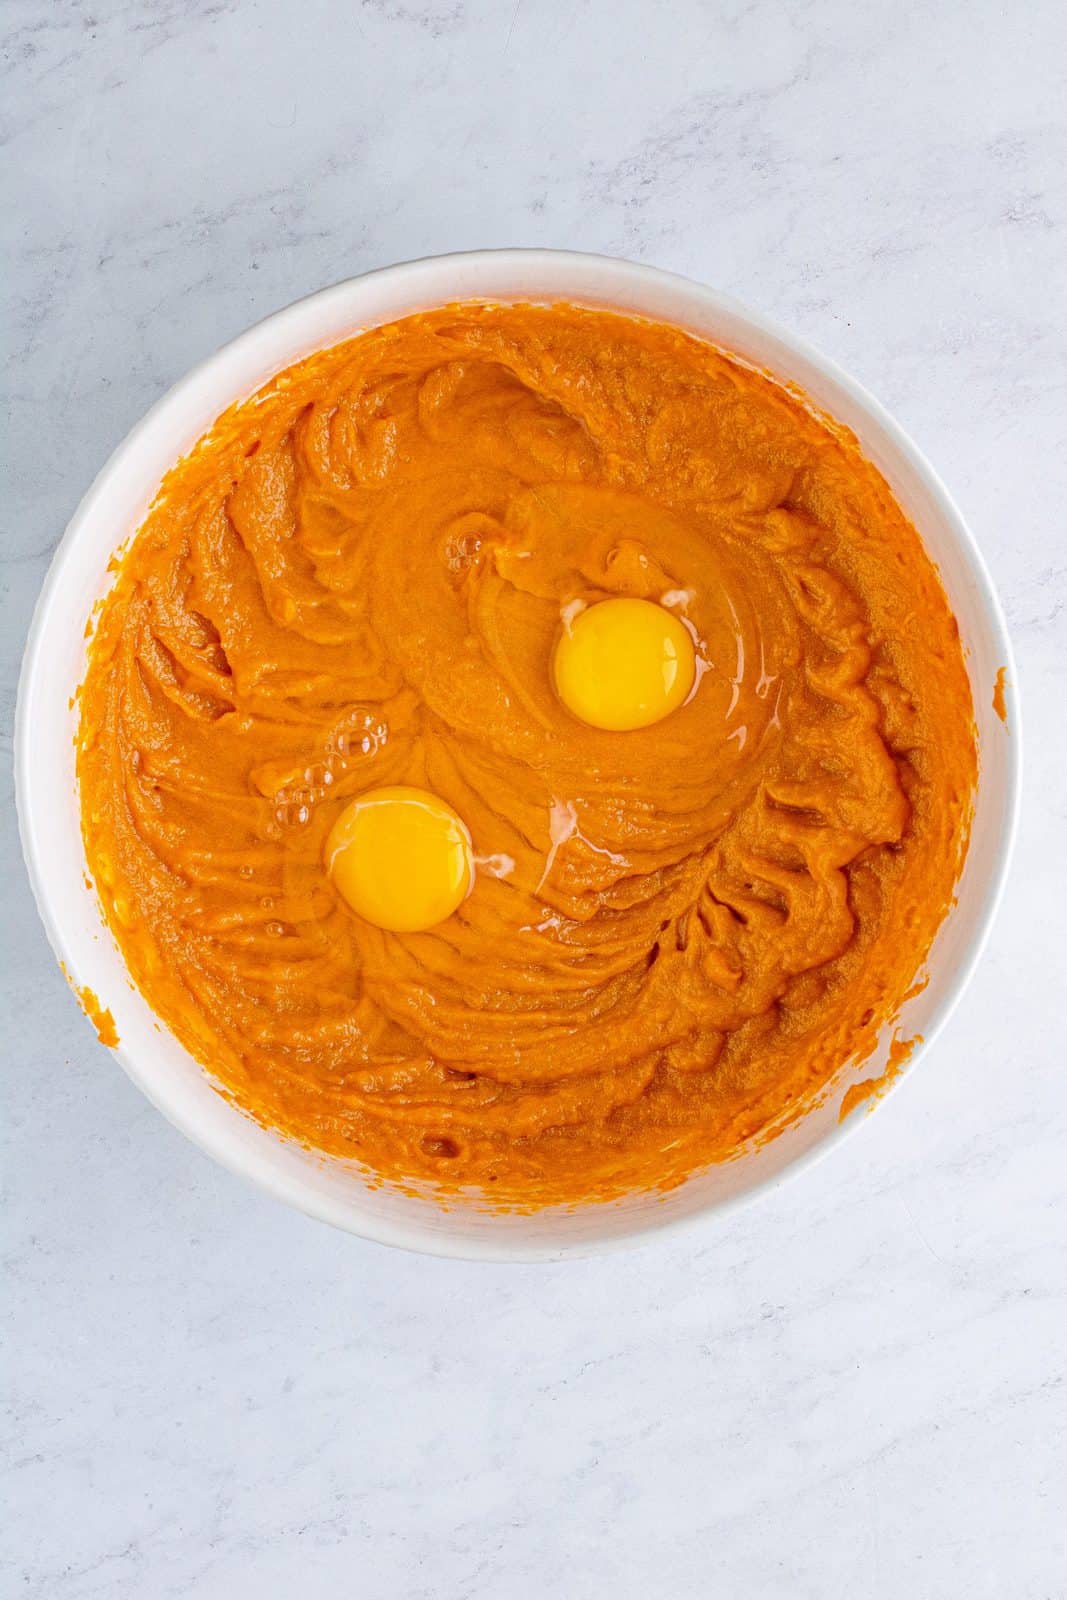 Eggs added to sweet potato mixture in bowl.